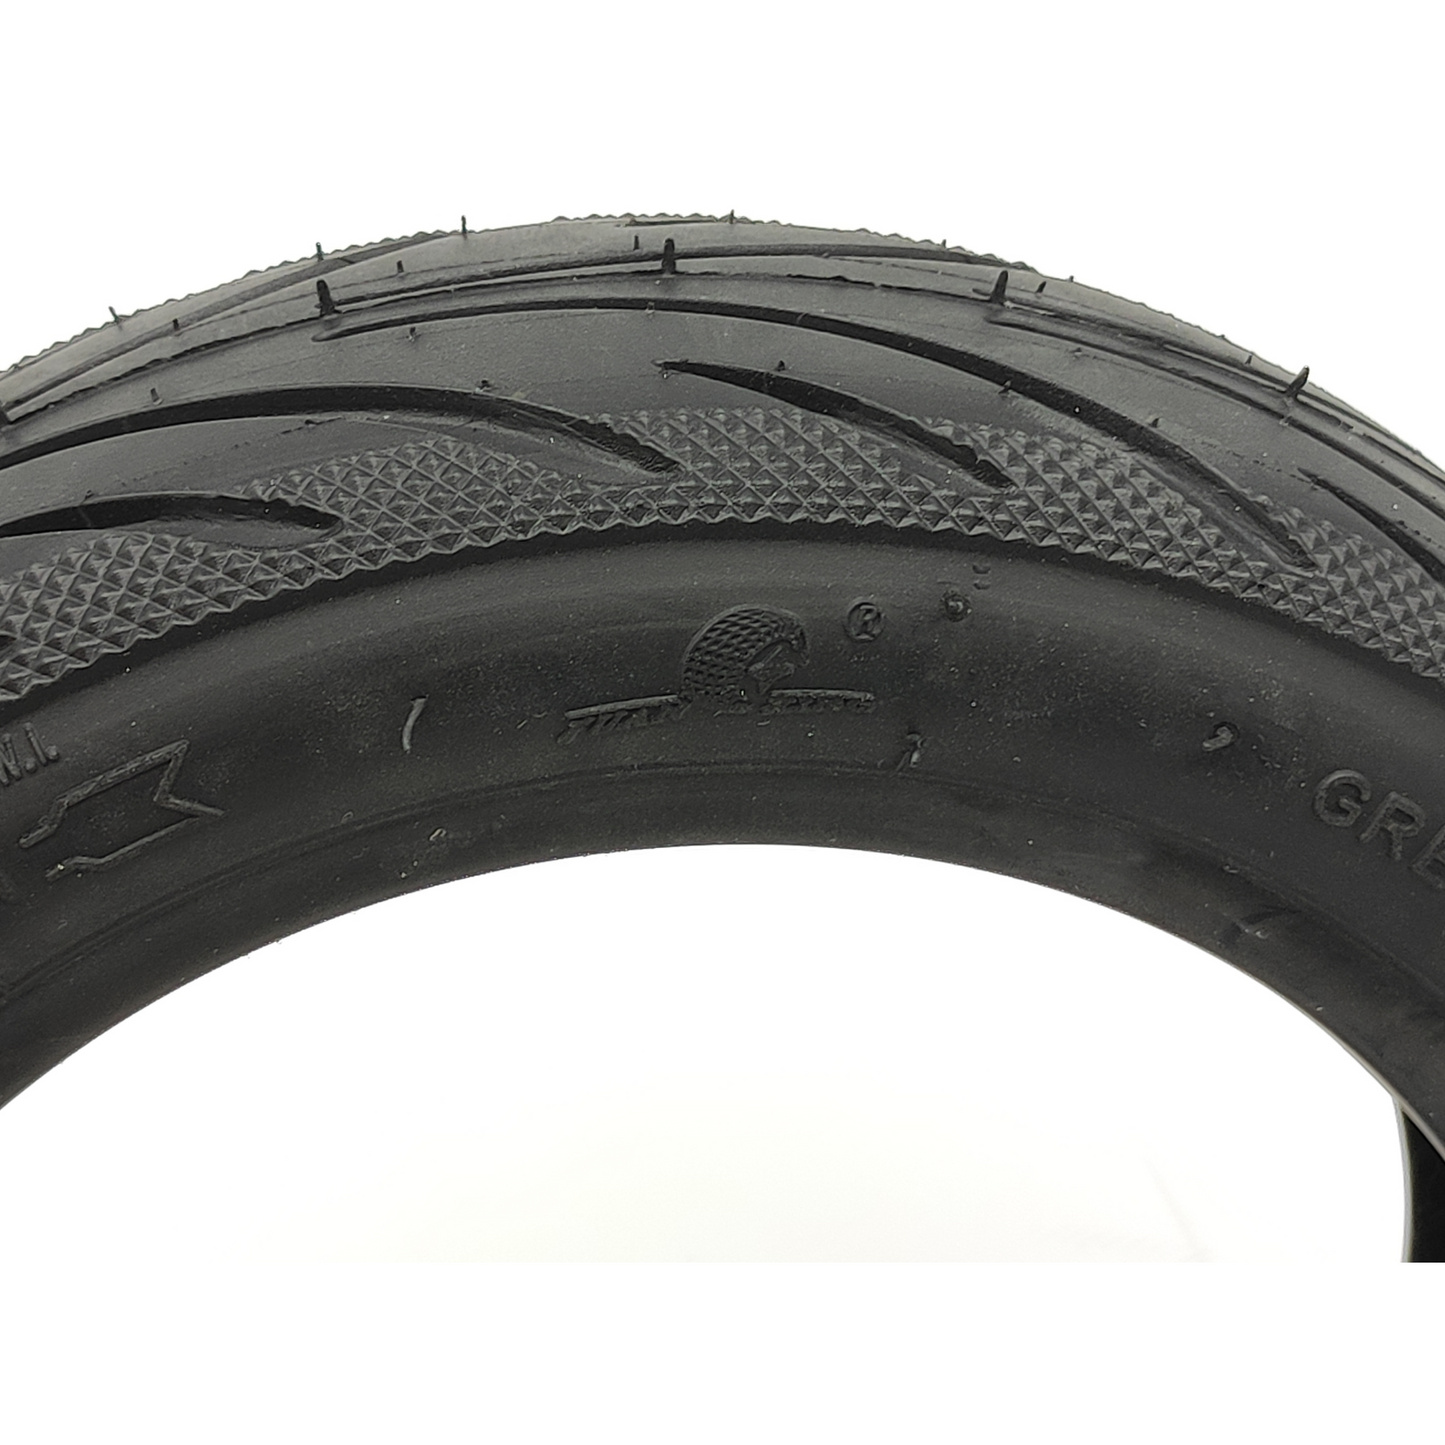 Ninebot Max G30 Tire 60/70-6.5 Tire Tubeless with Gel OEM